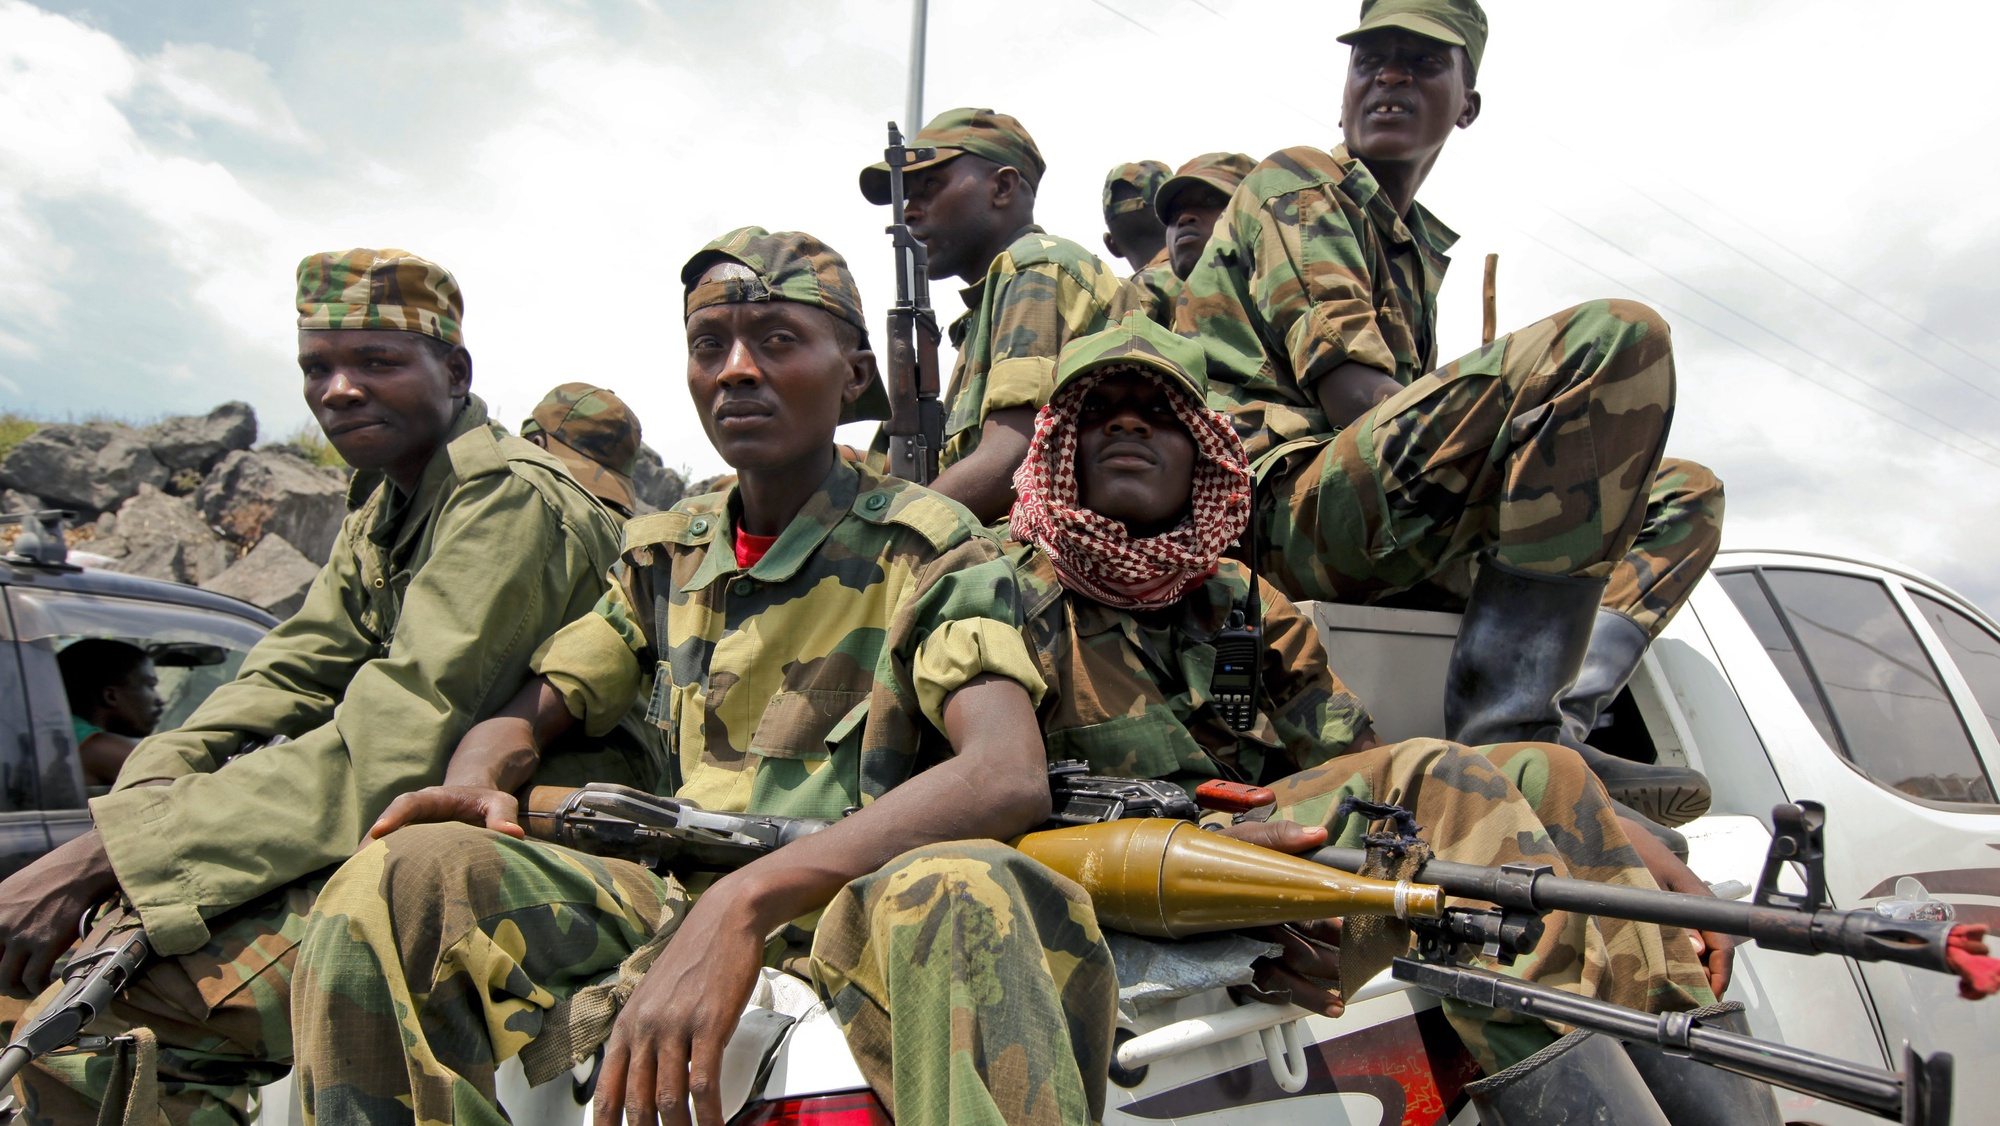 epa03936382 (FILES) A group of M23 rebel fighters sit on a pickup truck as they prepare to leave the city, in Goma, eastern Democratic Republic of Congo, 01 December 2012. The M23 rebel group in the eastern Democratic Republic of Congo is ending its insurgency, it was announced 05 November 2013. In a statement the movement said it would adopt &#039;purely political means&#039; to achieve its goals and urged its fighters to disarm and demobilise.  EPA/DAI KUROKAWA *** Local Caption *** 50618534